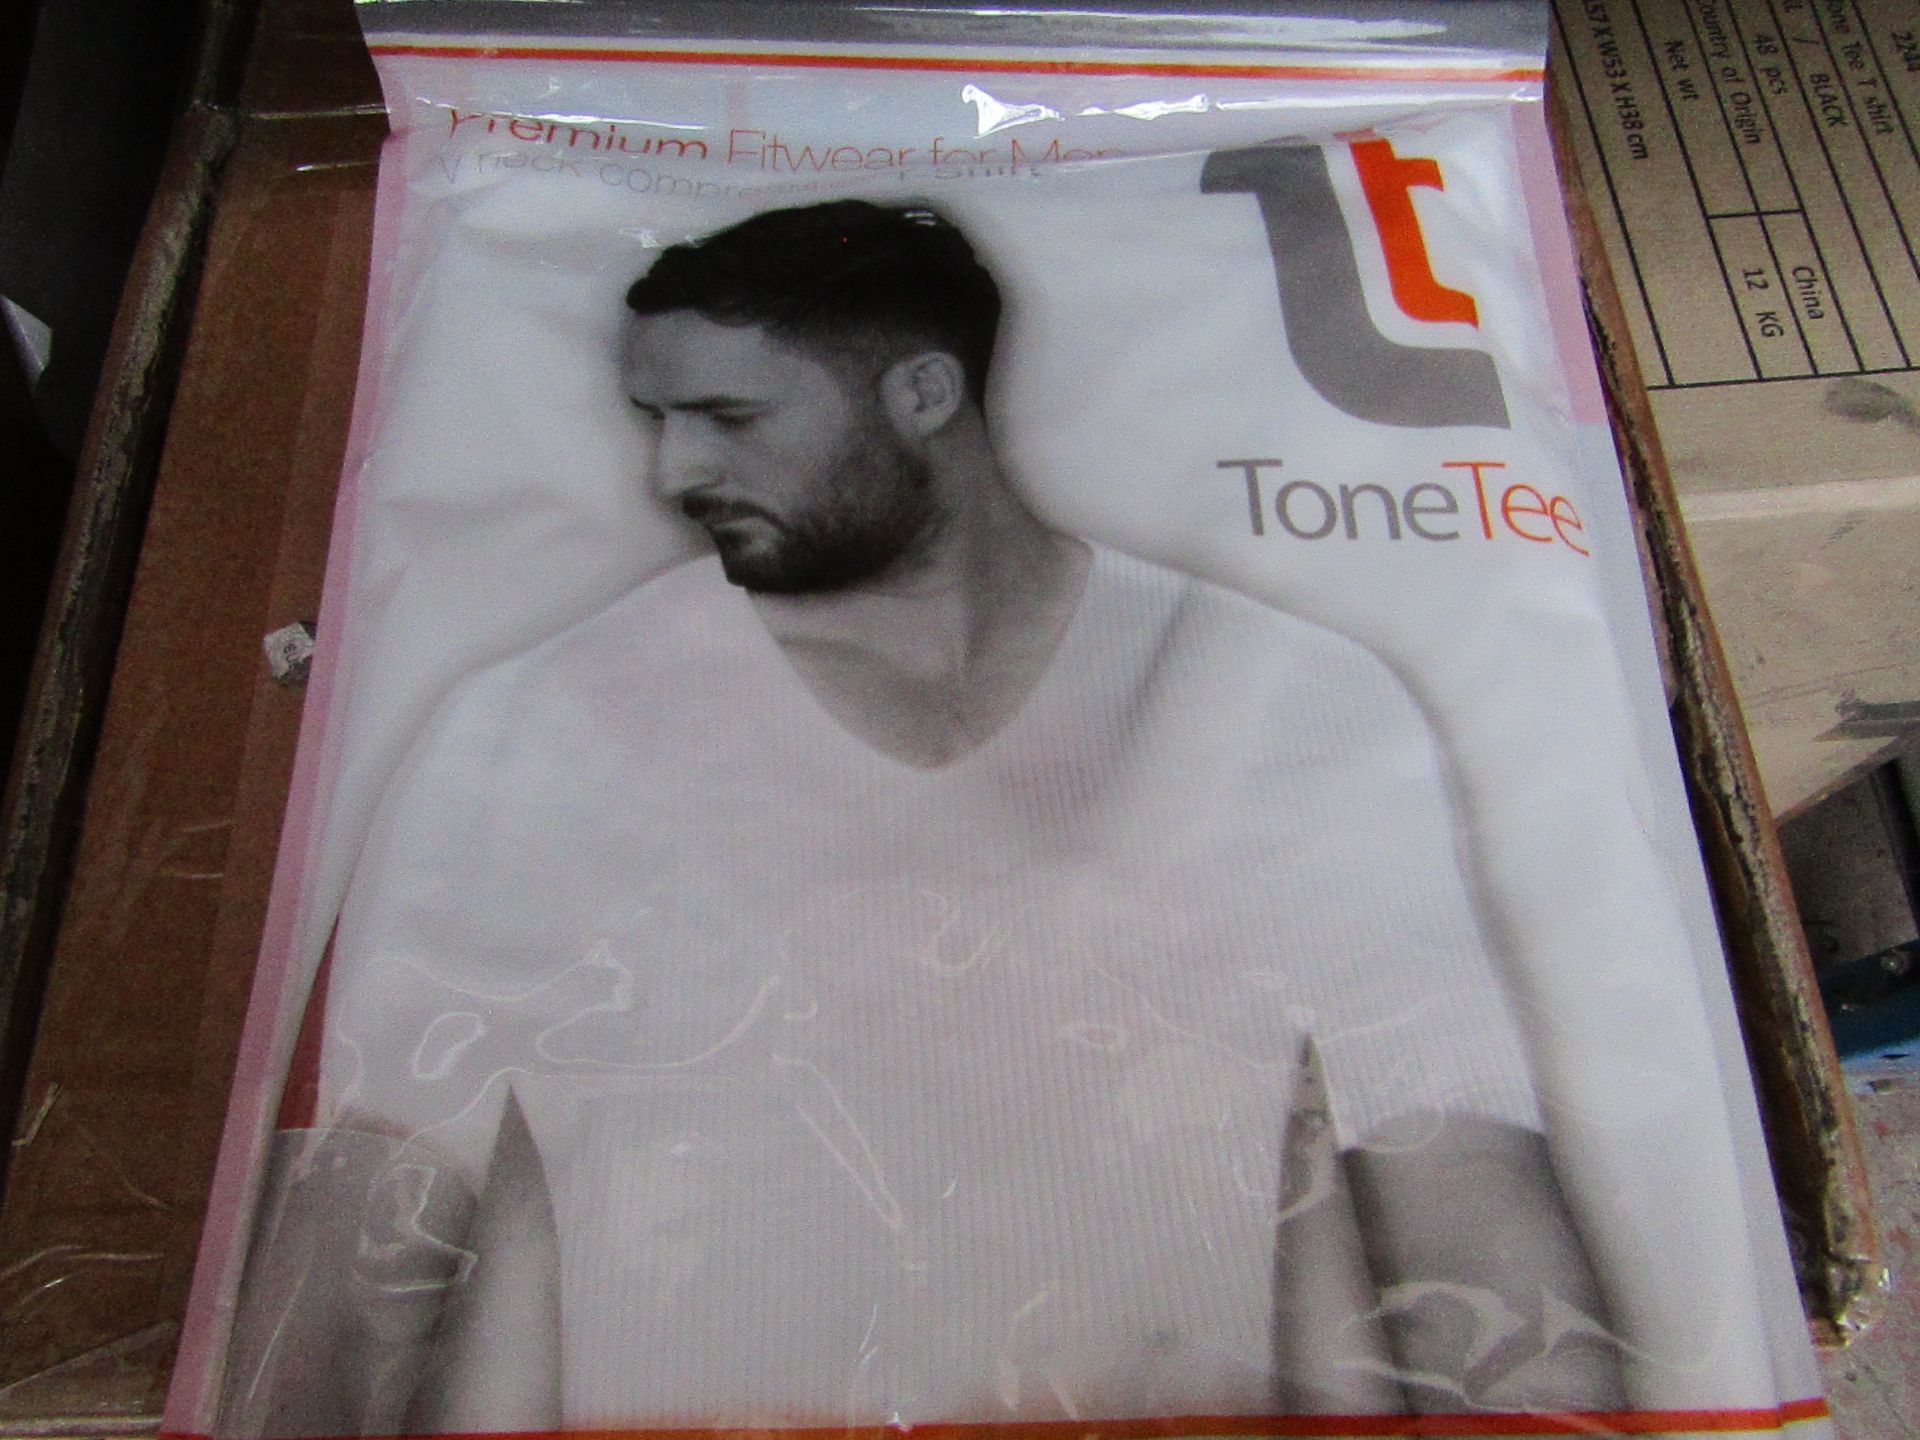 | 48x | TONE TEE V NECK COMPRESSION T-SHIRT WHITE XL | PACKAGED & BOXED | SKU 1508038582739 | RRP £